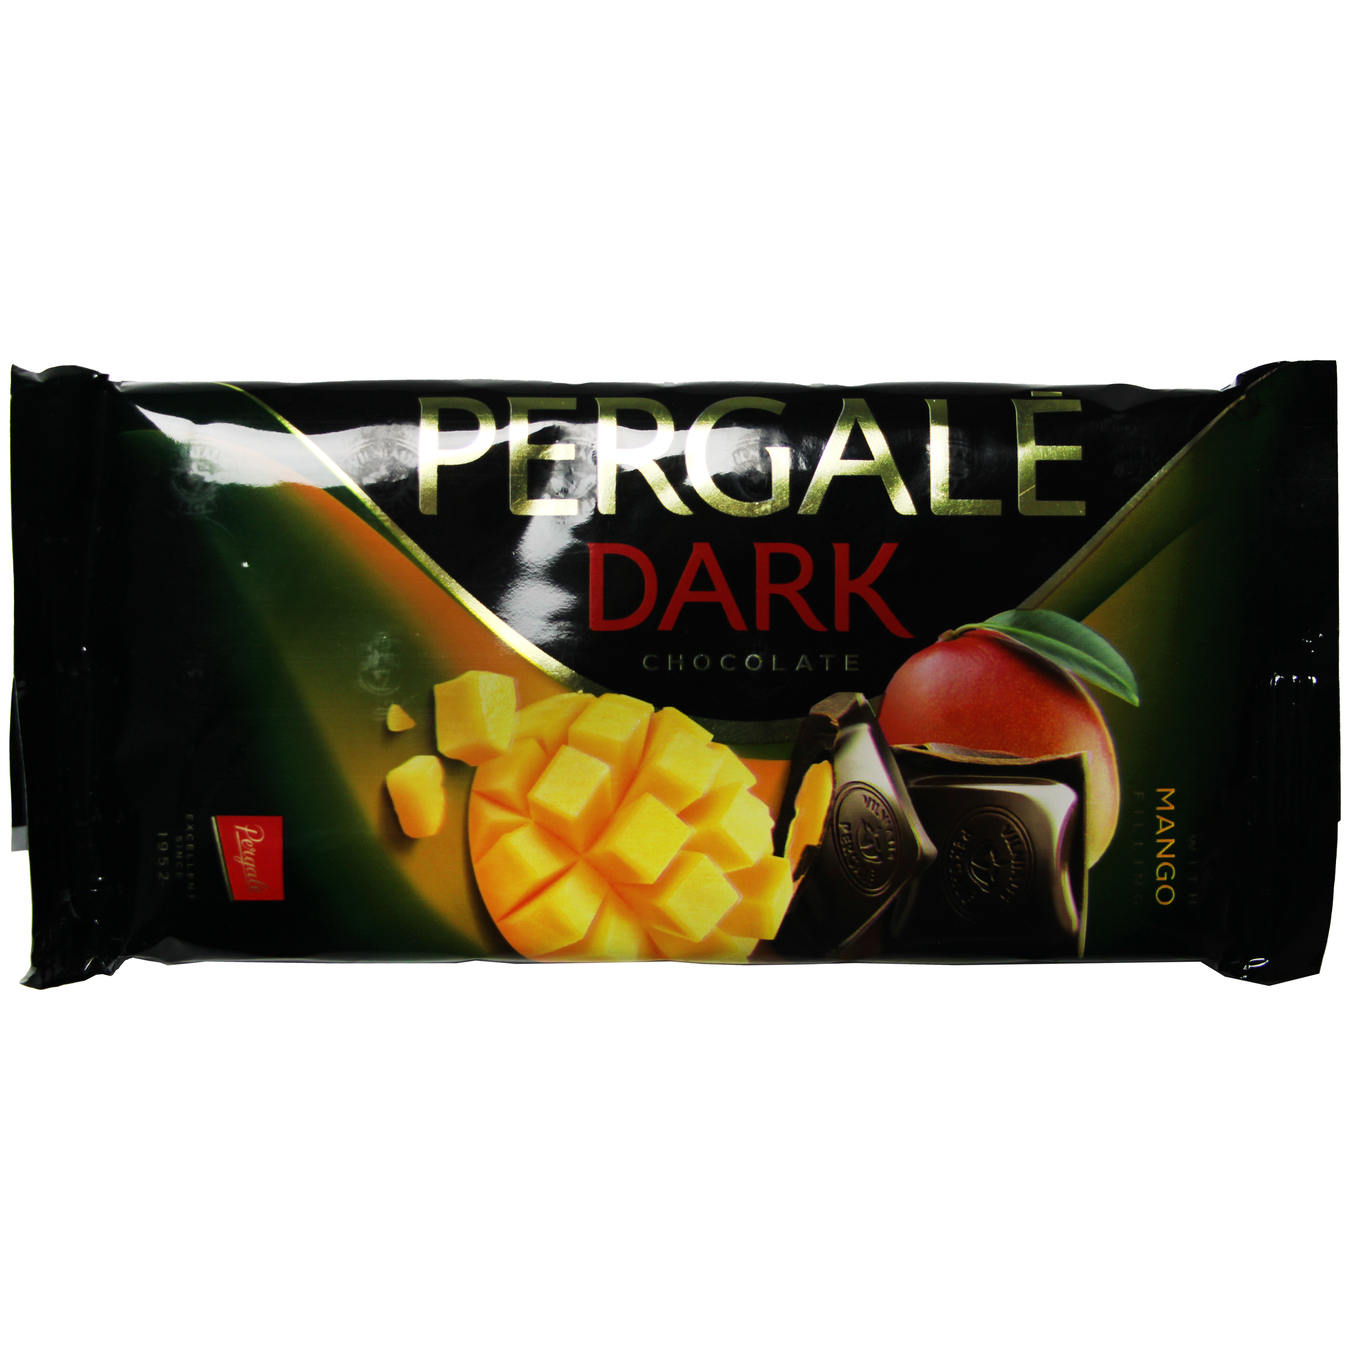 Pergale Black Chocolate with Mango Filling 100g